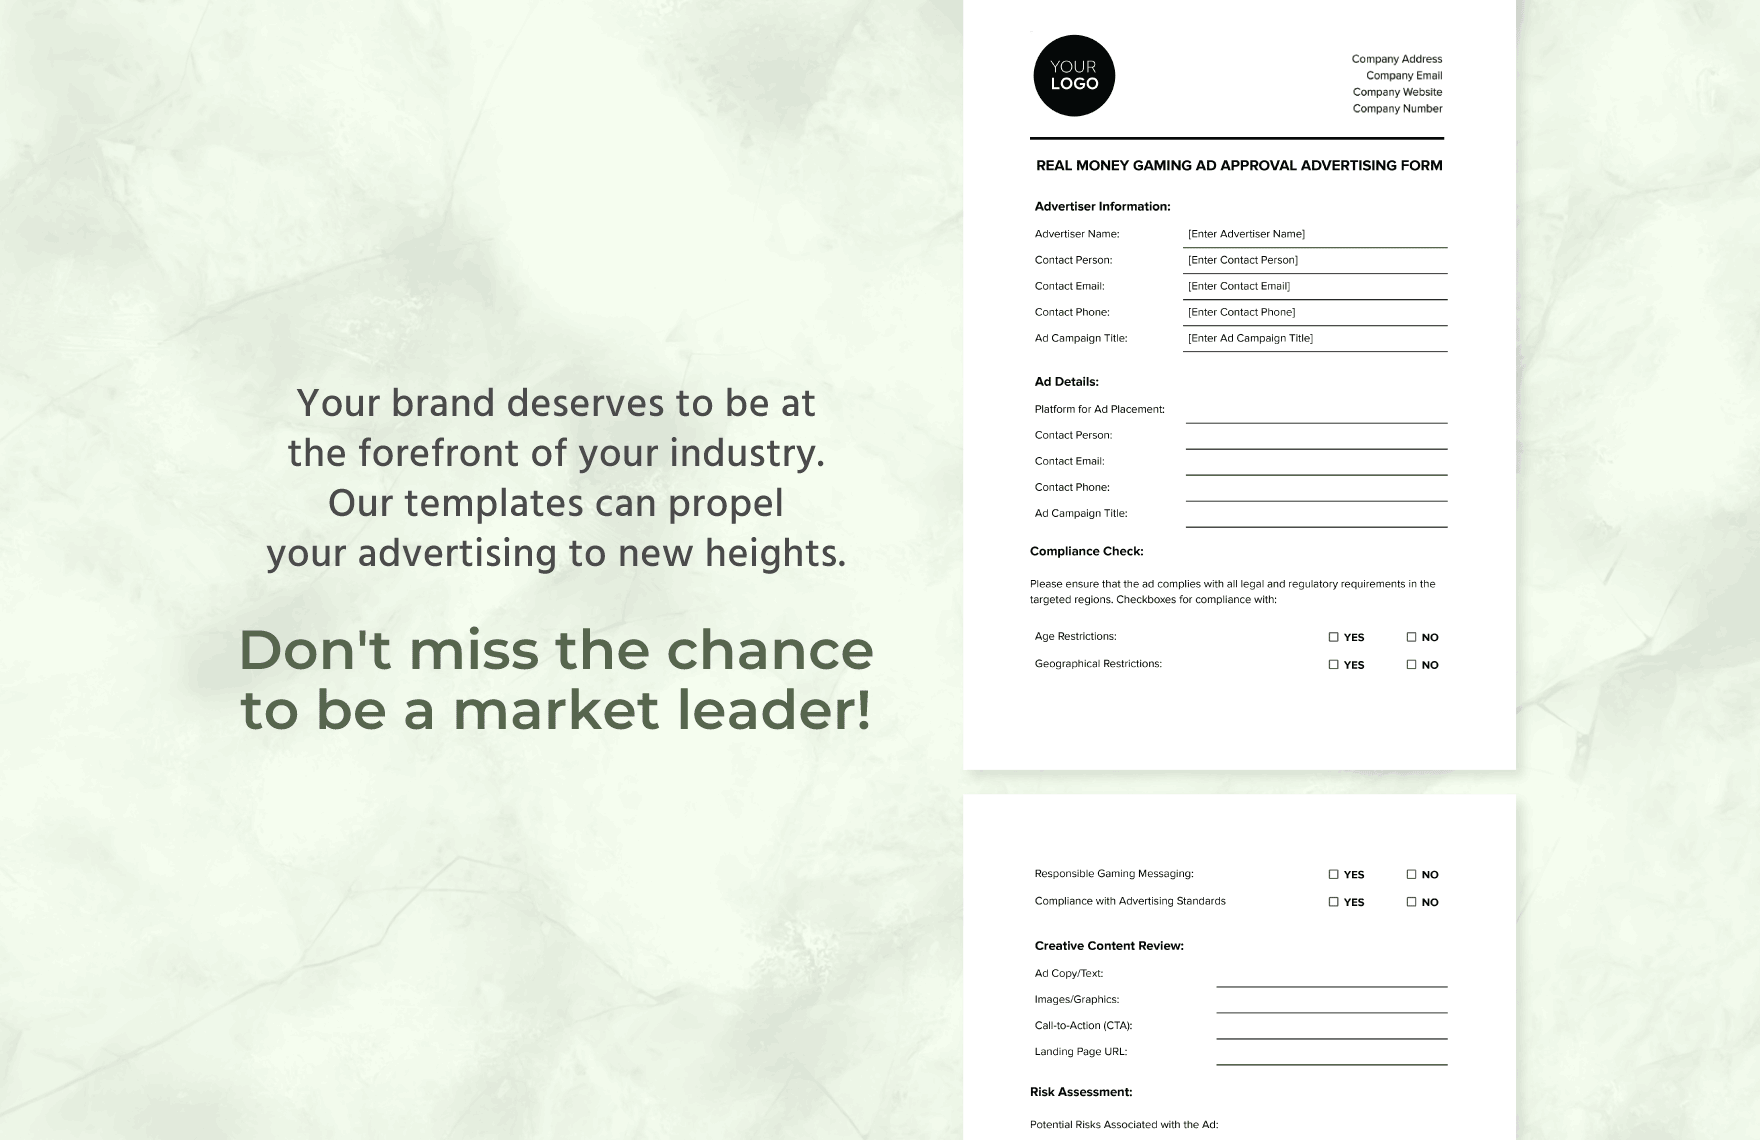 Real Money Gaming Ad Approval Advertising Form Template